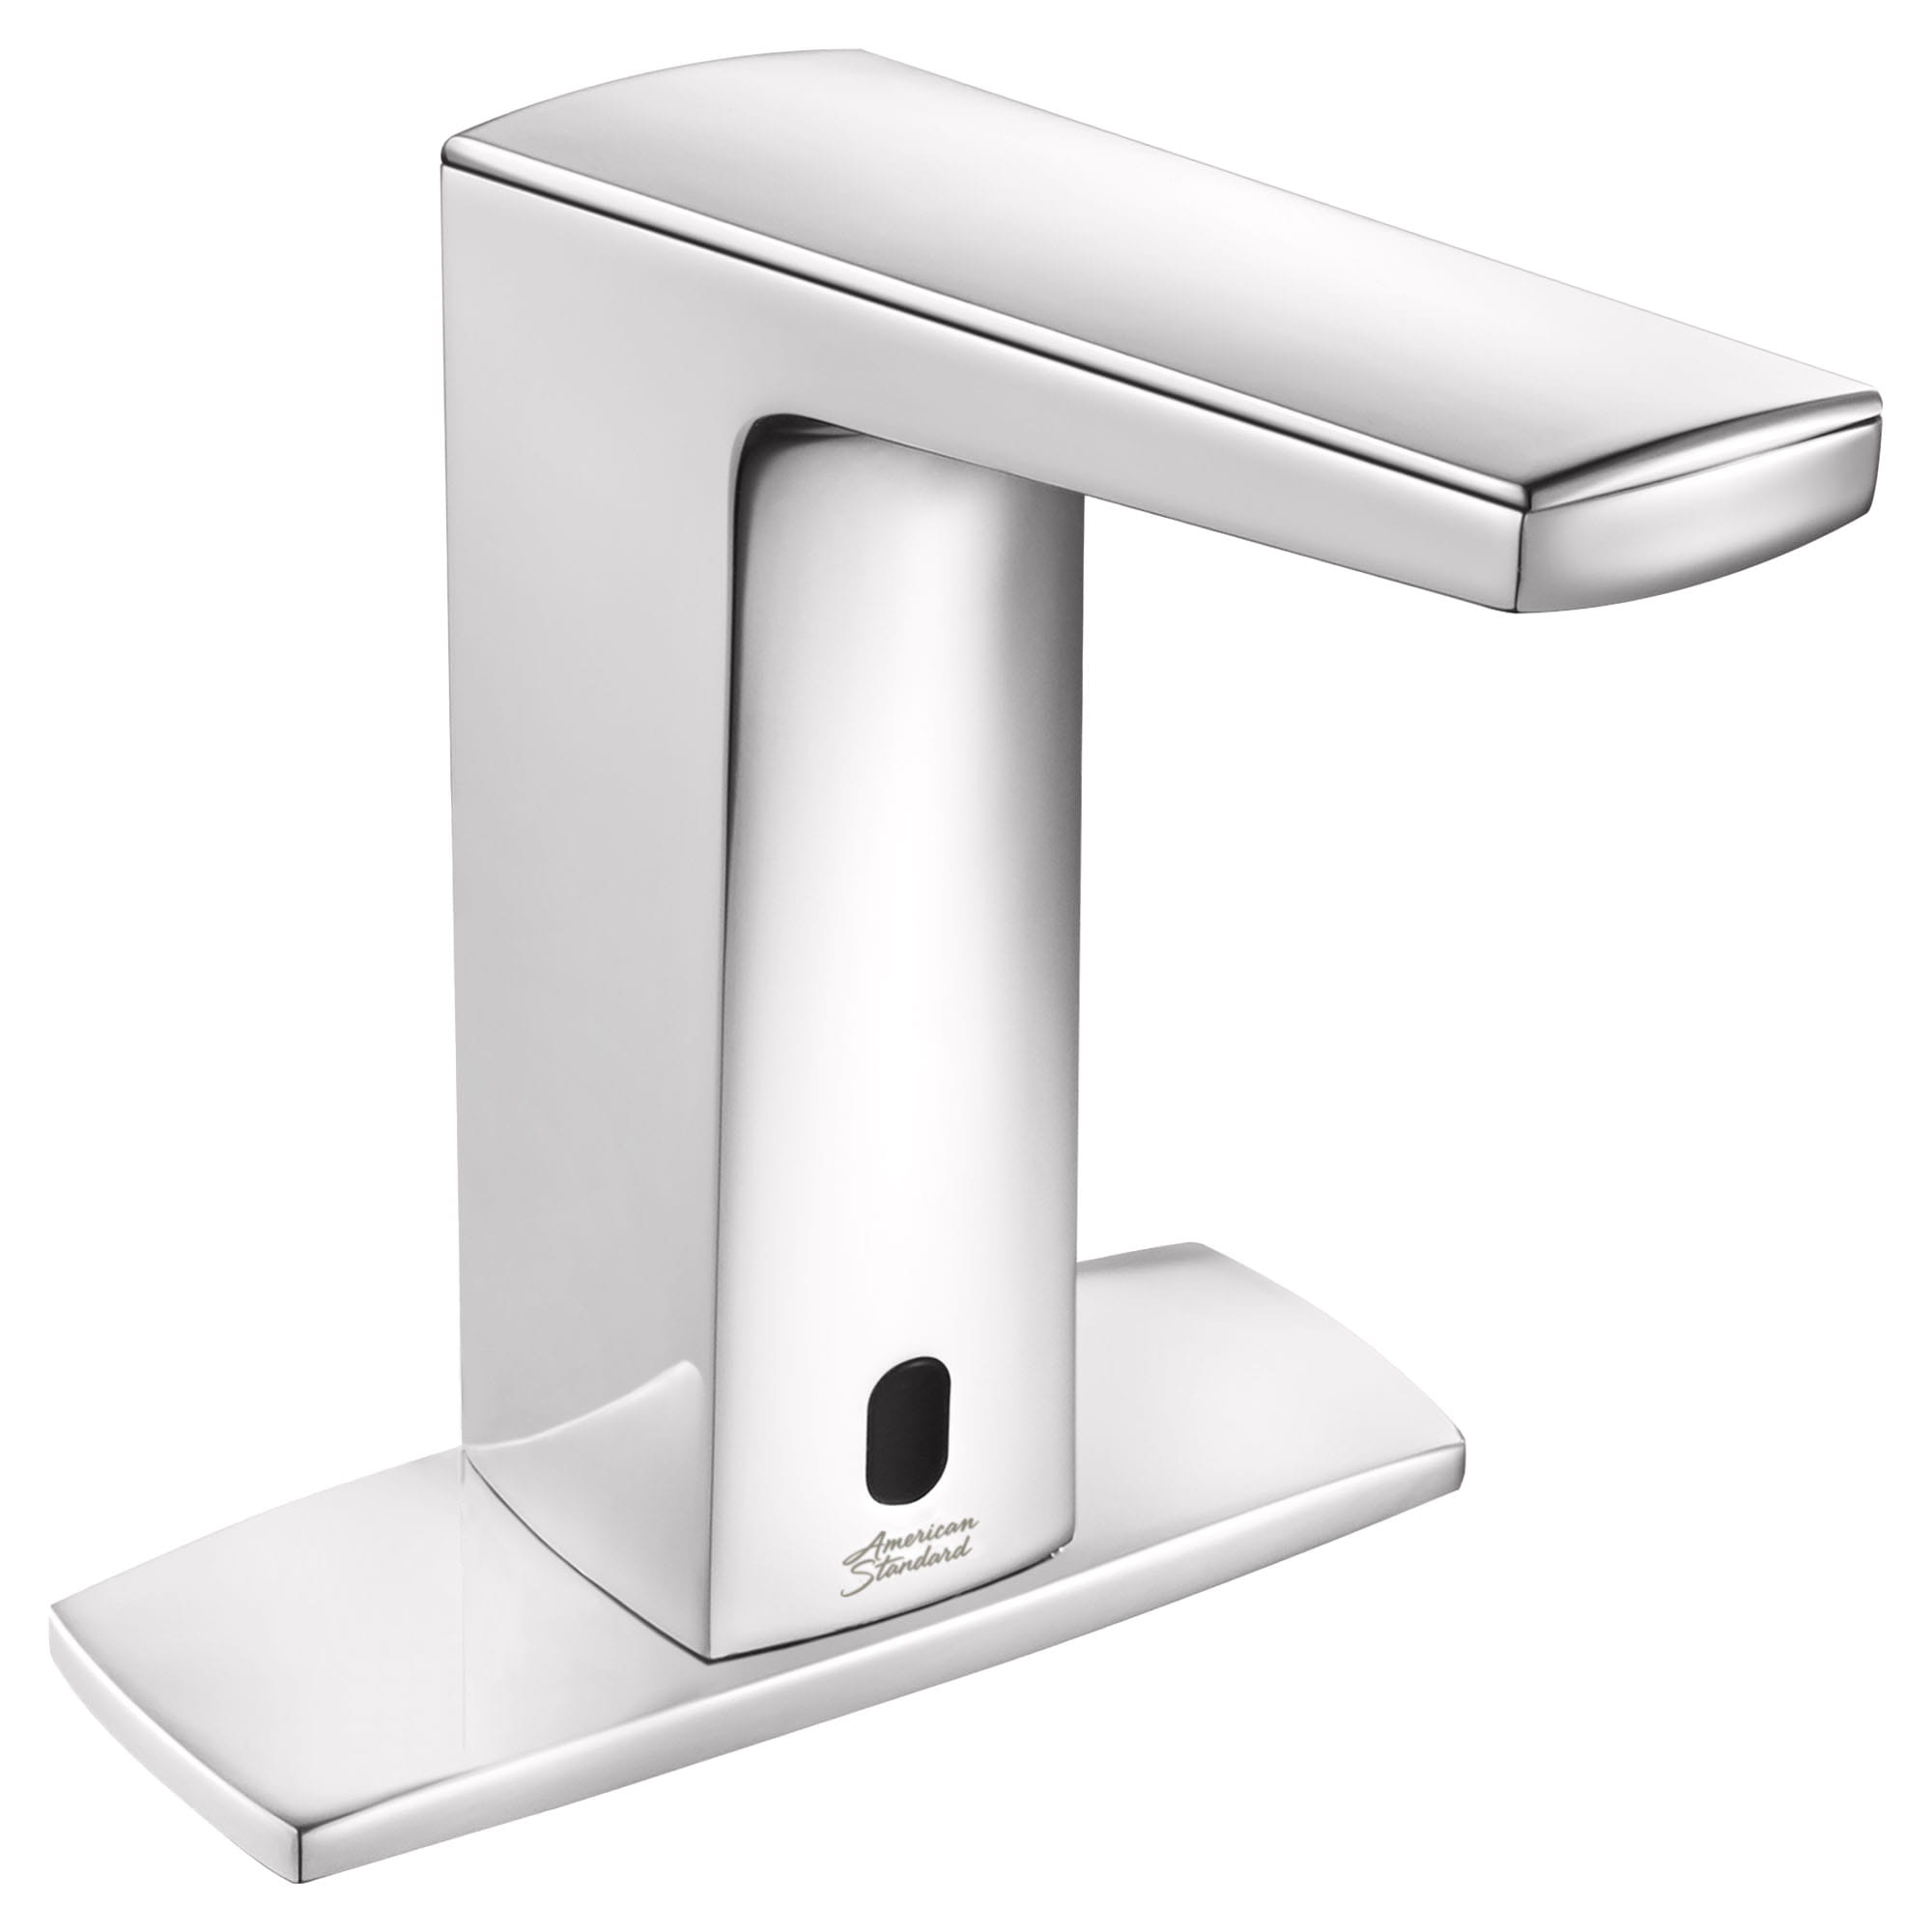 Paradigm® Selectronic® Touchless Faucet, Battery-Powered With SmarTherm Safety Shut-Off + ADM, 1.5 gpm/5.7 Lpm